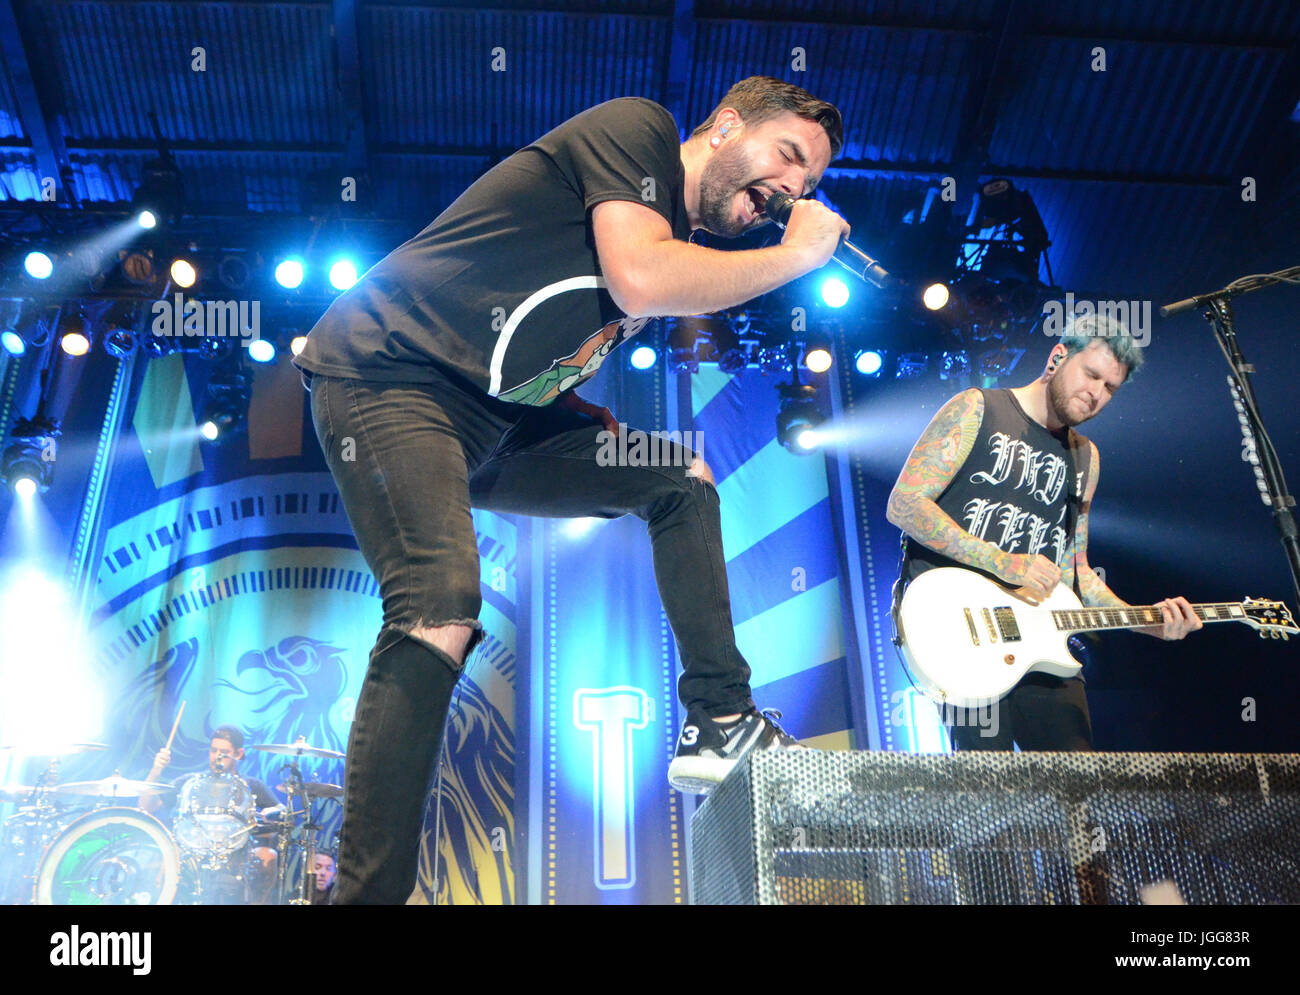 Milwaukee, Wisconsin, USA. 6th July, 2017. Lead singer Jeremy McKinnon of the band A Day To Remember performs live at Henry Maier Festival Park during Summerfest in Milwaukee, Wisconsin. Ricky Bassman/Cal Sport Media/Alamy Live News Stock Photo